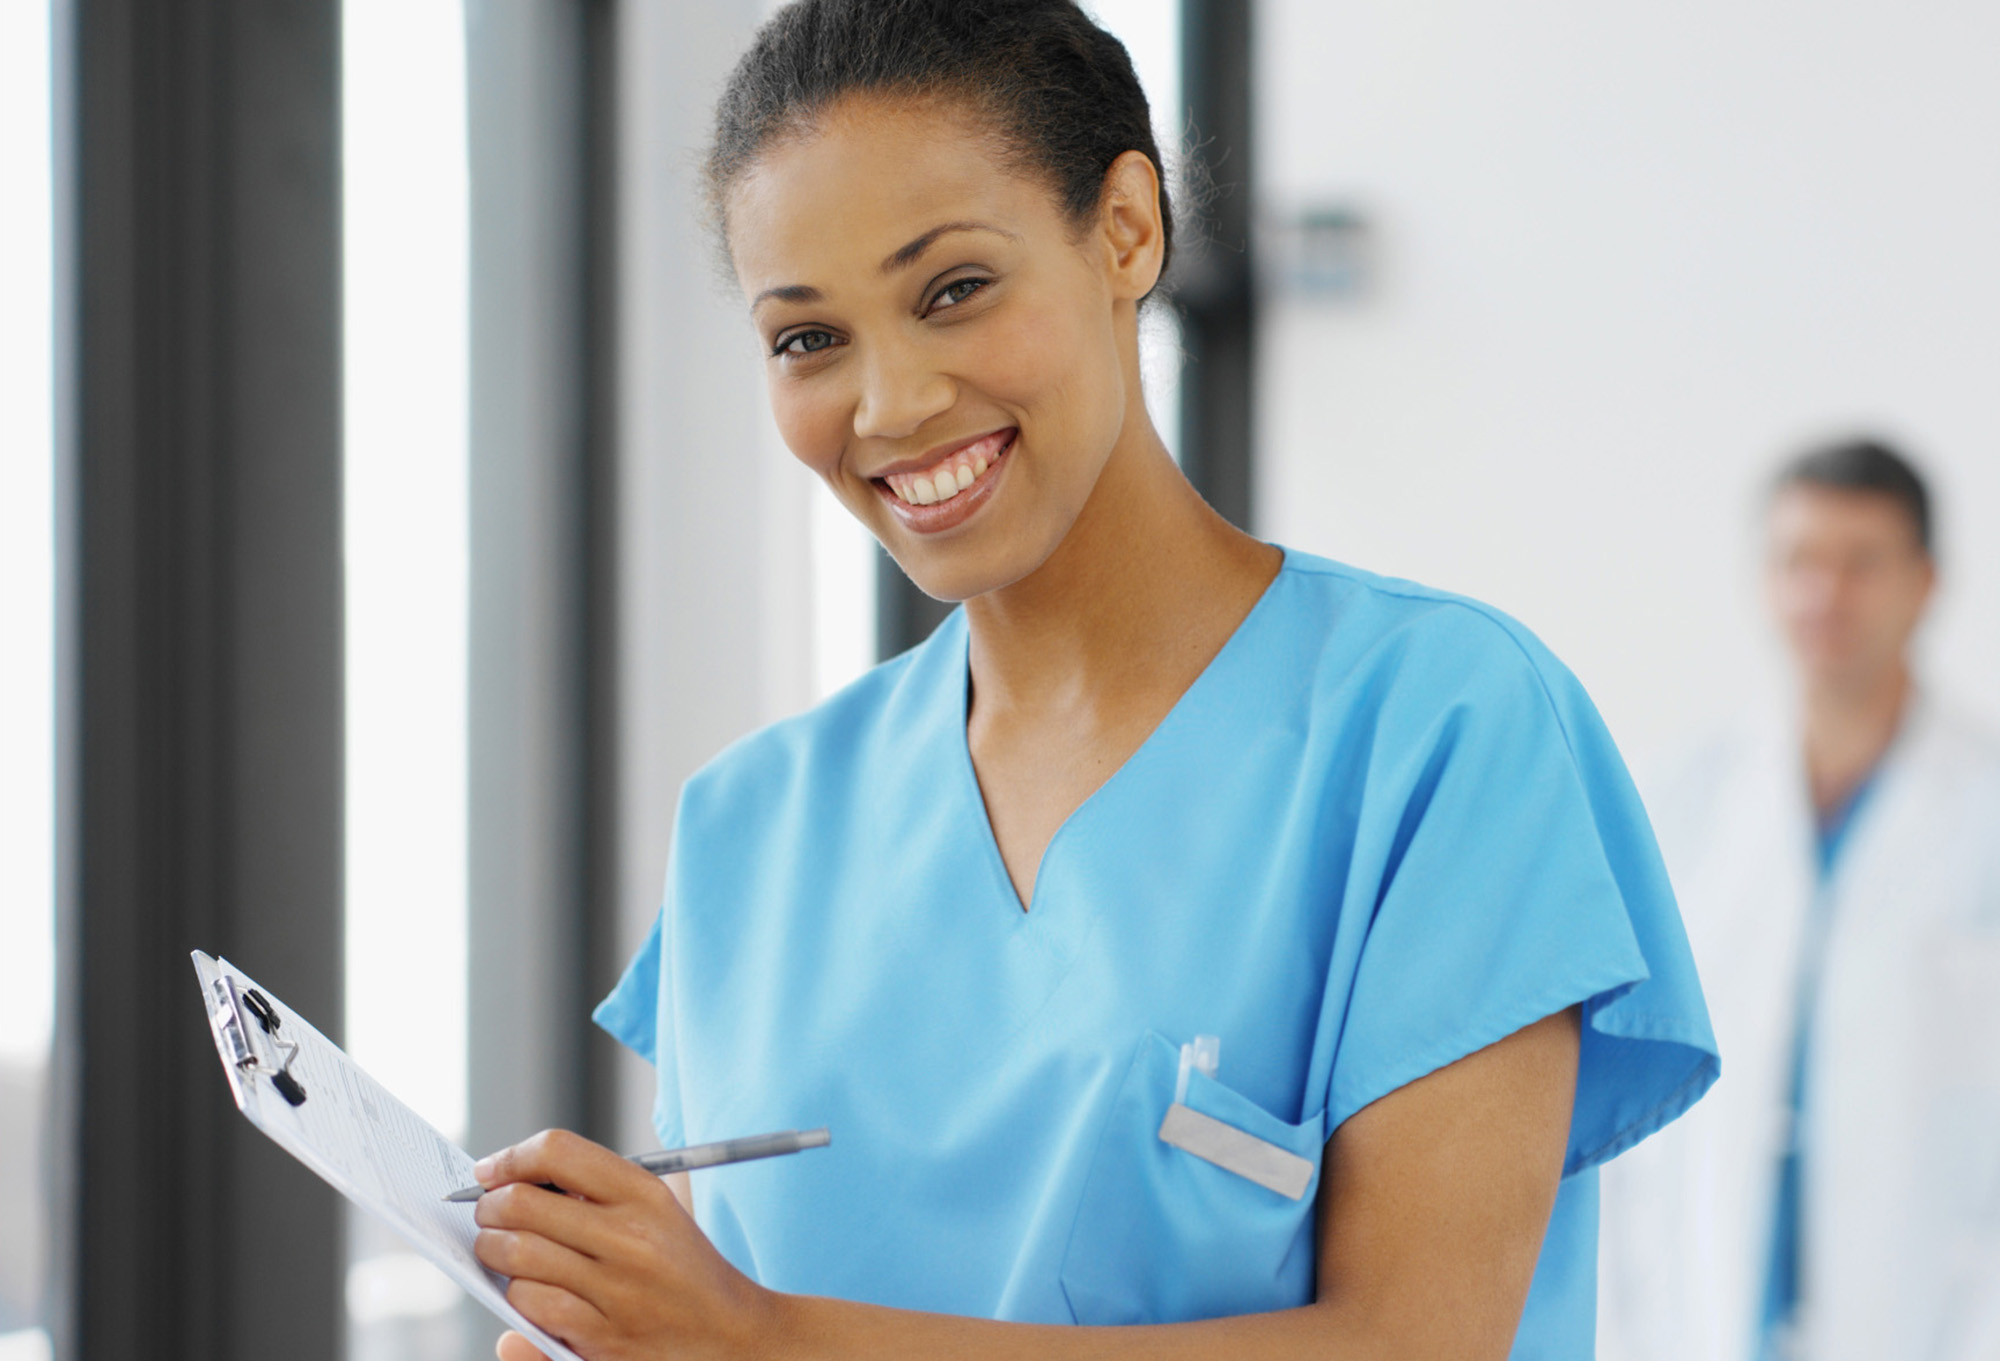 image of a young nurse wearing medical scrubs holding a clipboard